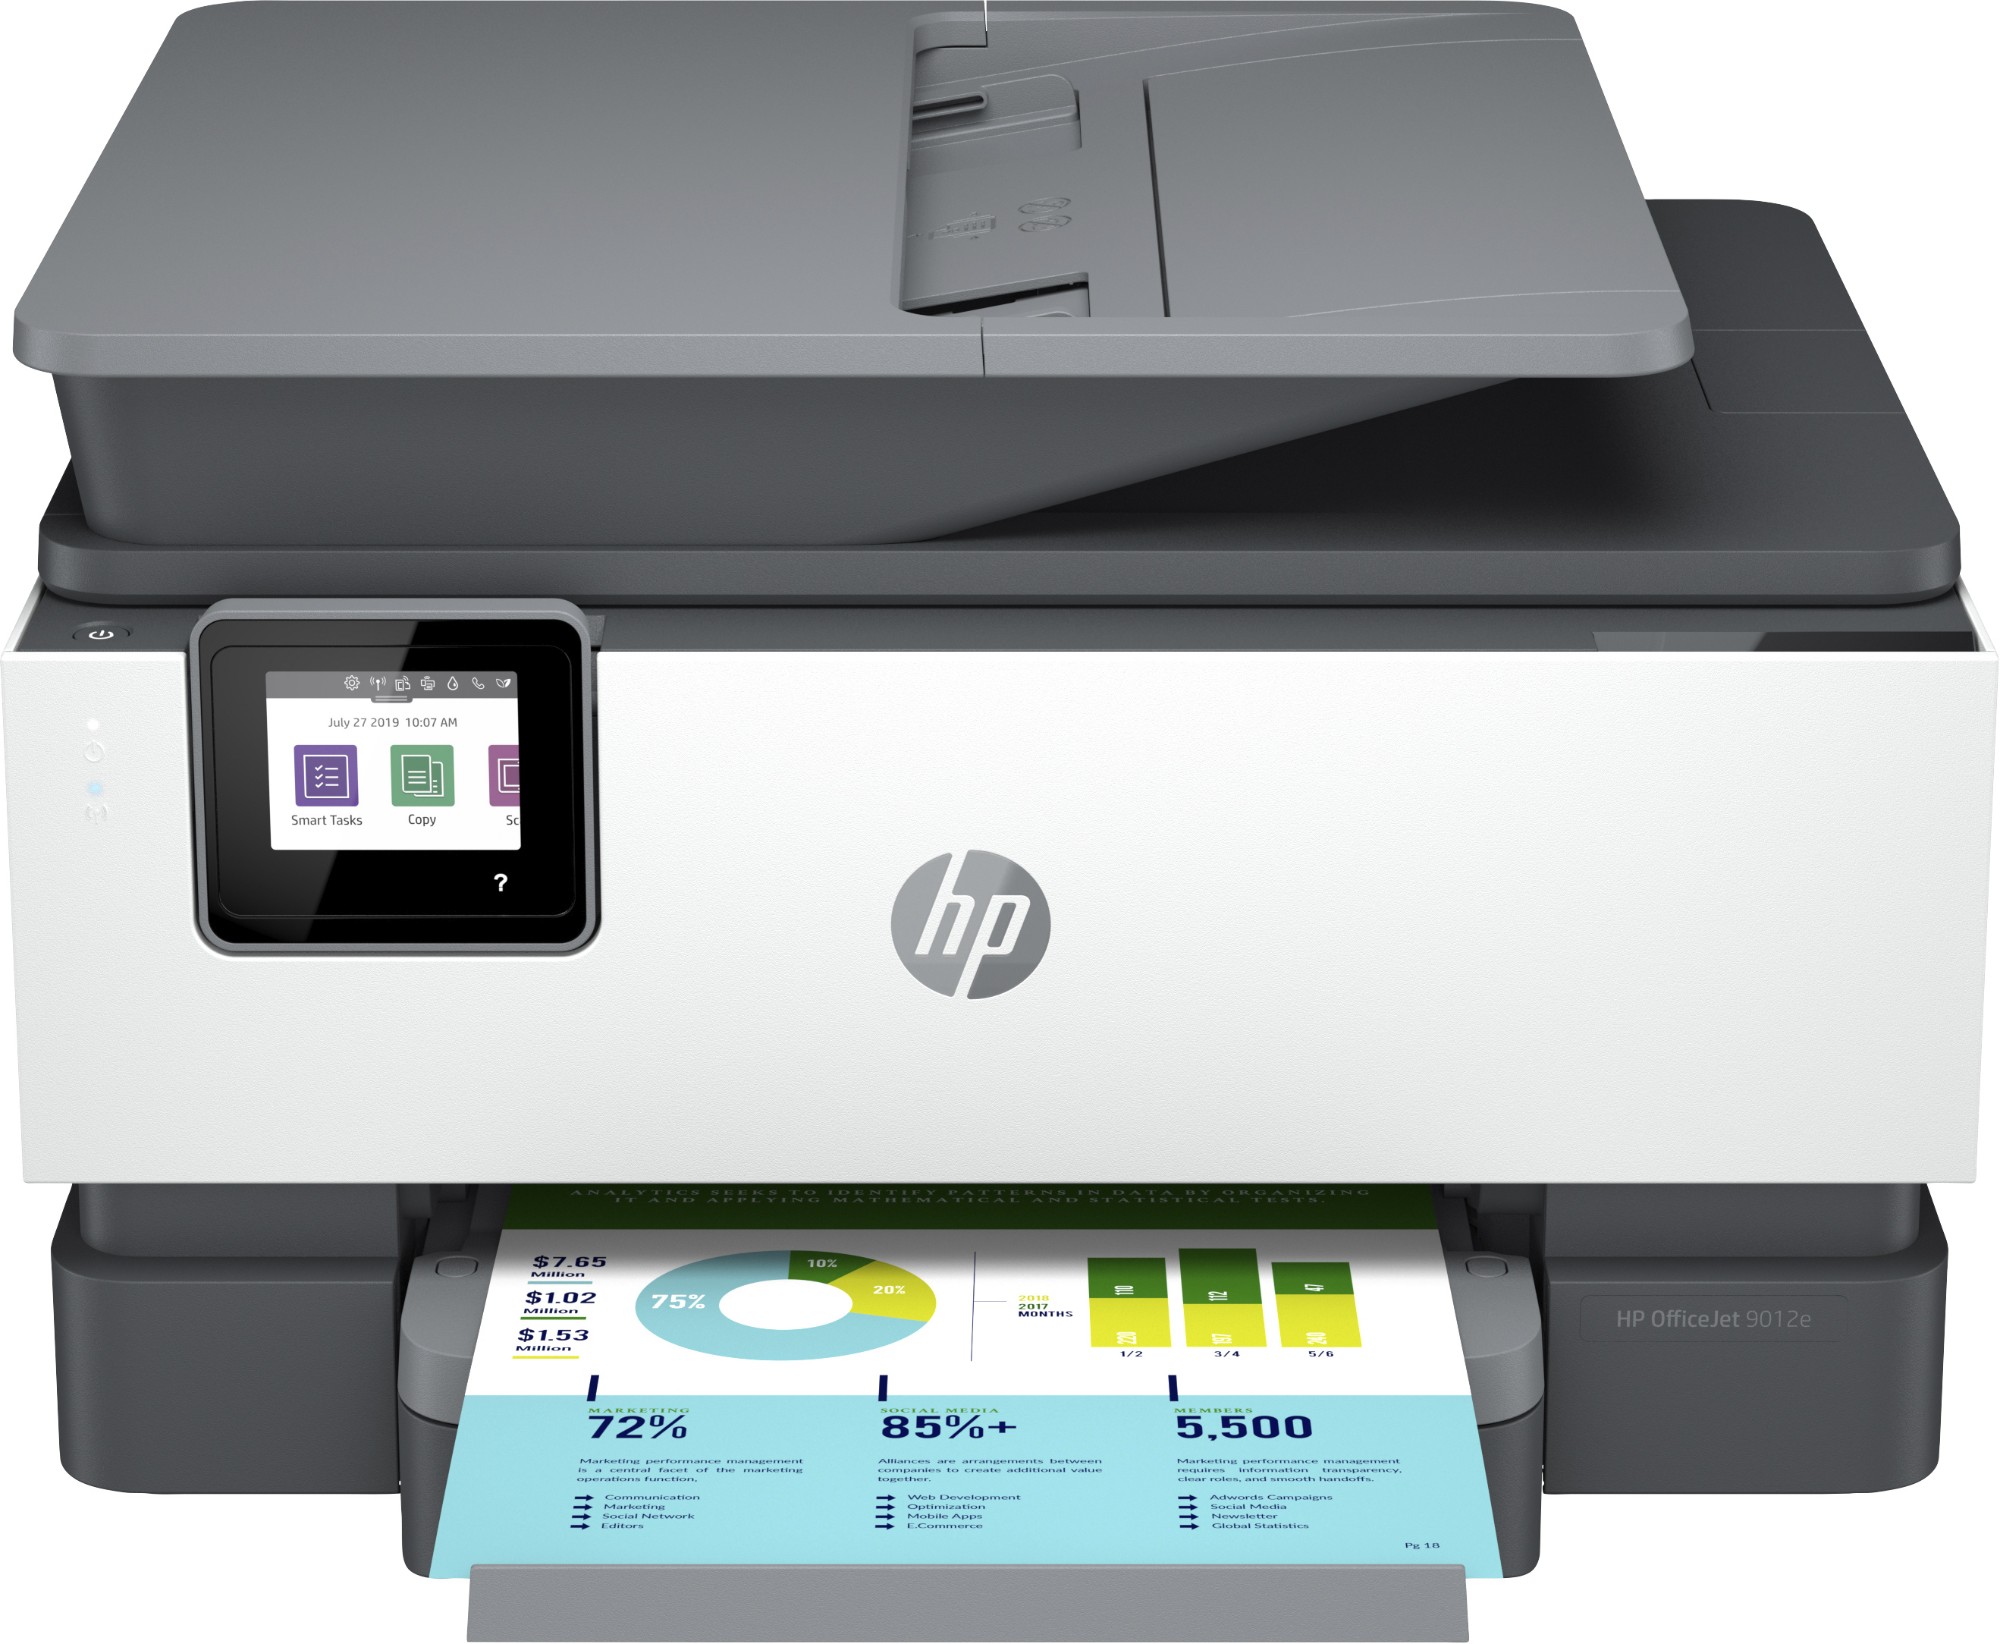 HP OfficeJet Pro HP 9012e All-in-One Printer, Colour, Printer for Small office, Print, copy, scan, fax, HP+; HP Instant Ink eligible; Automatic document feeder; Two-sided printing